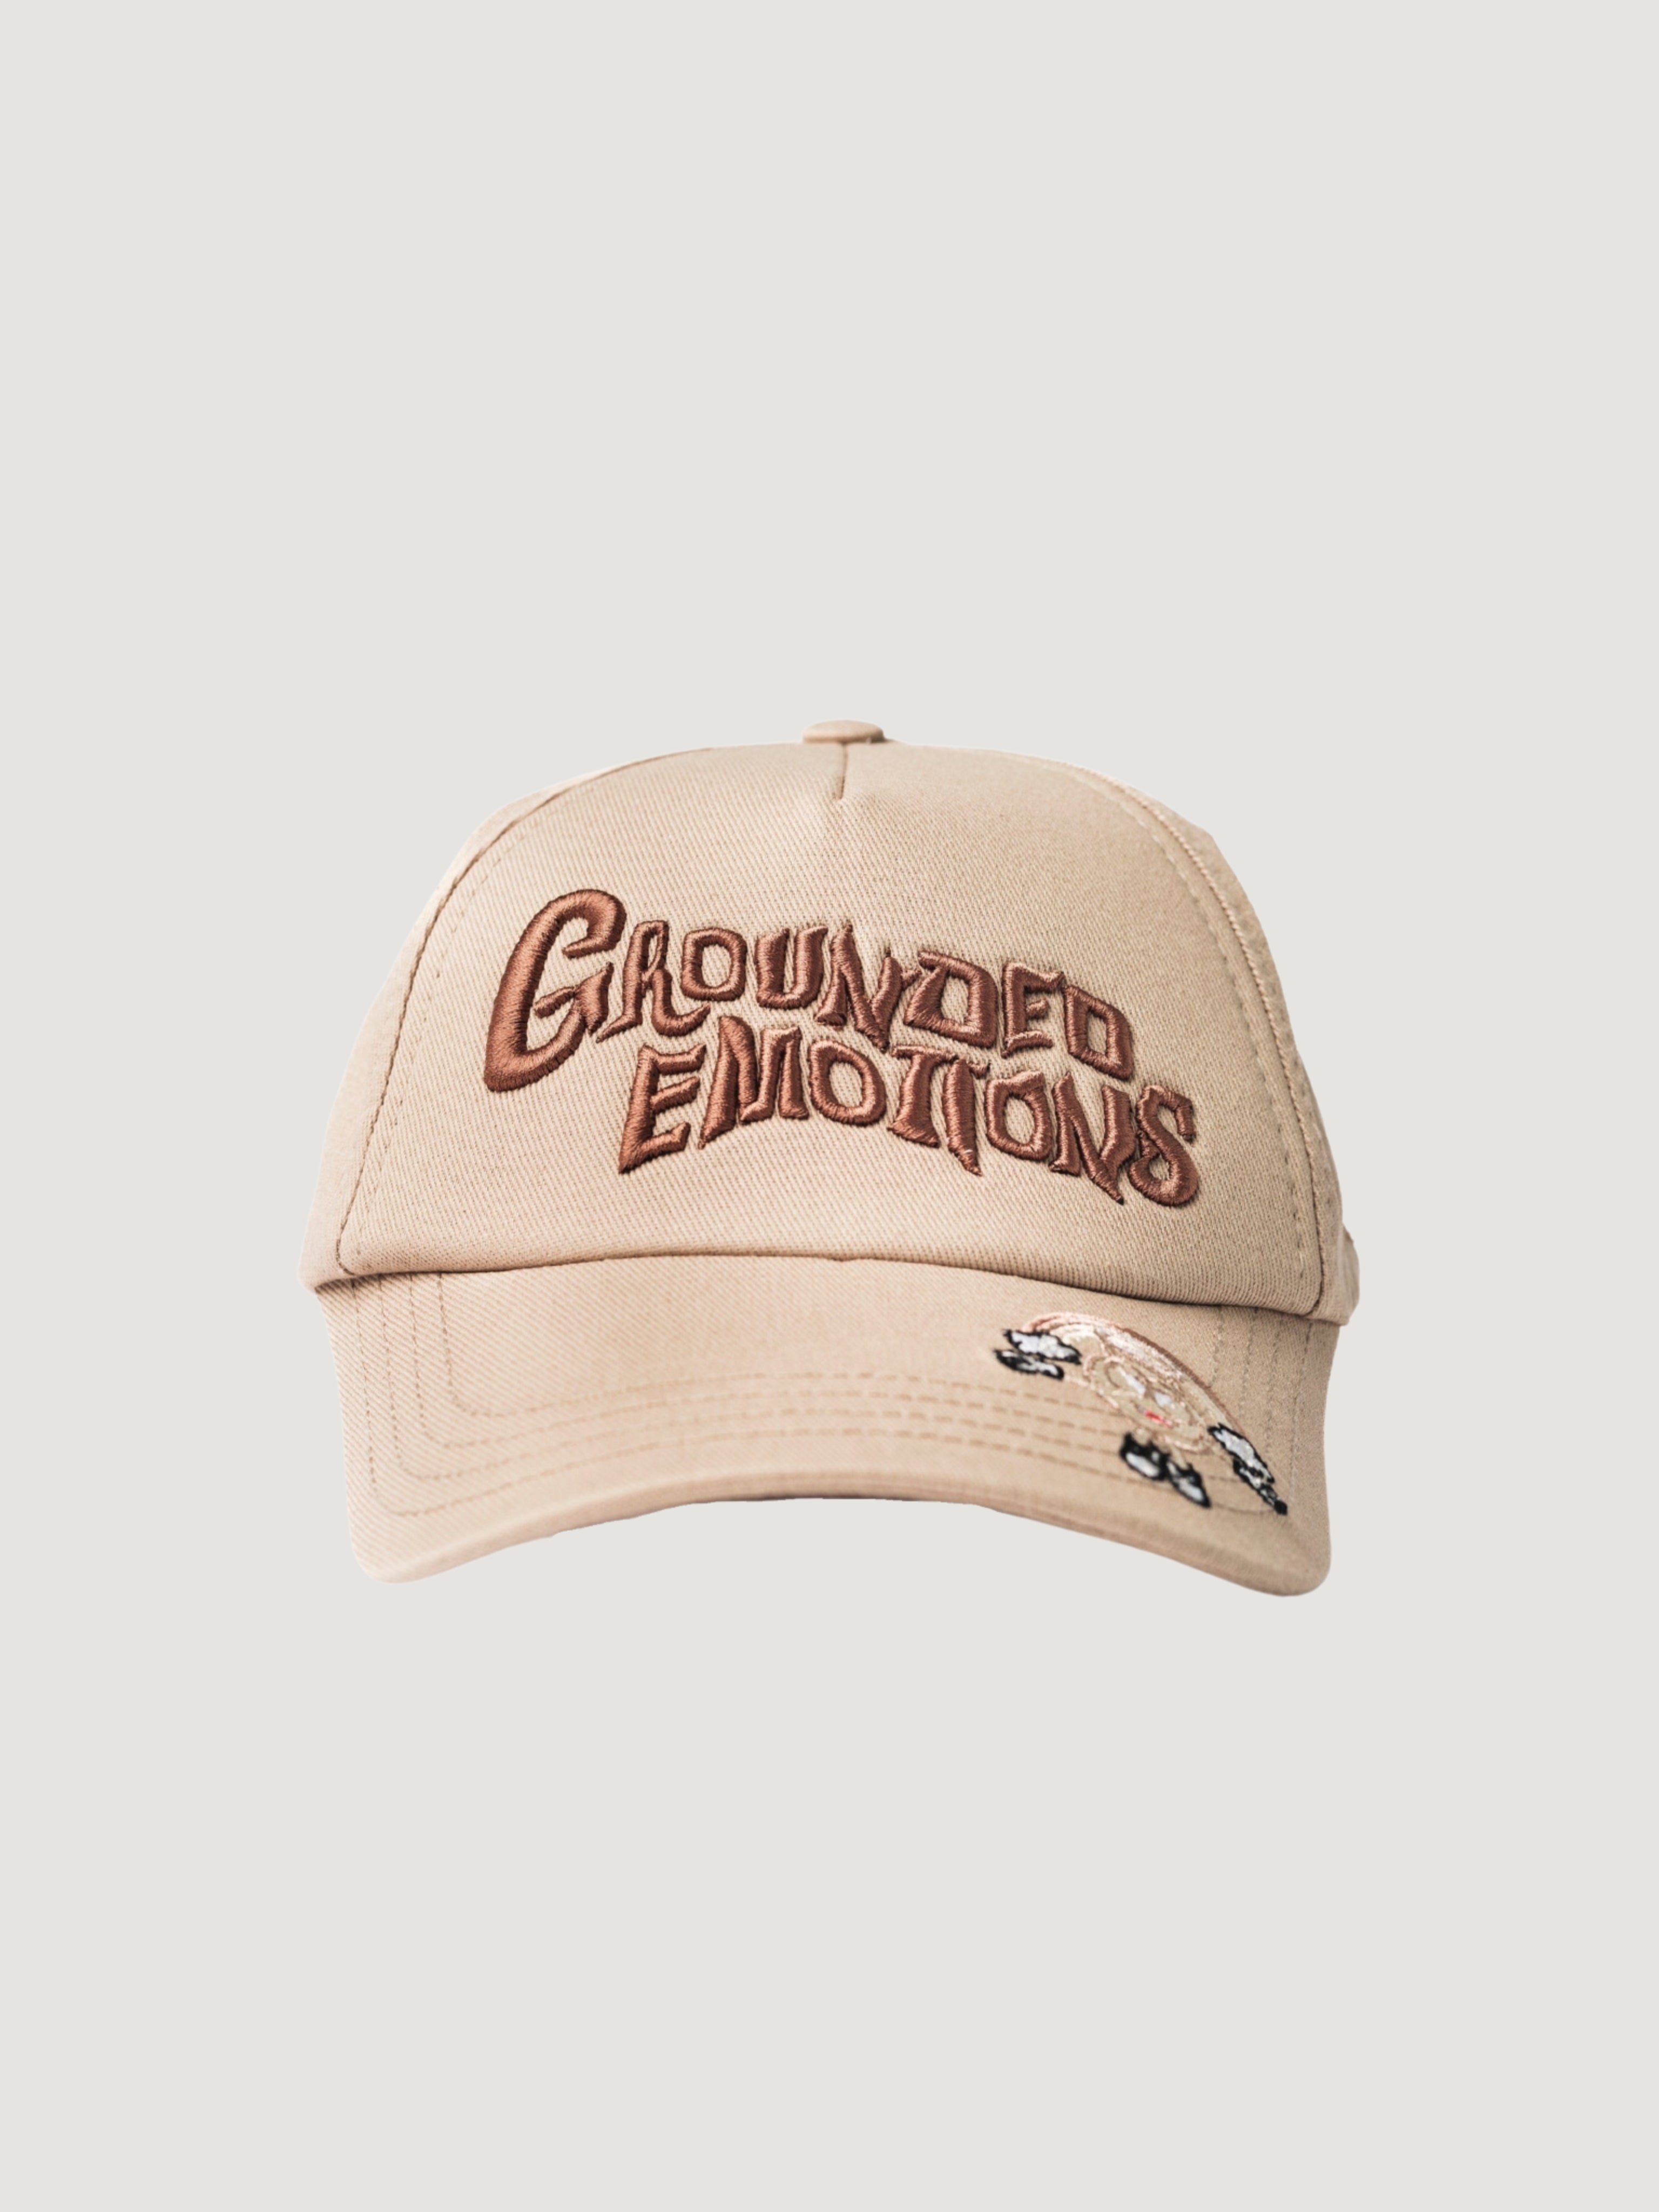 GROUNDED EMOTIONS CAP BEIGE - ATTODE